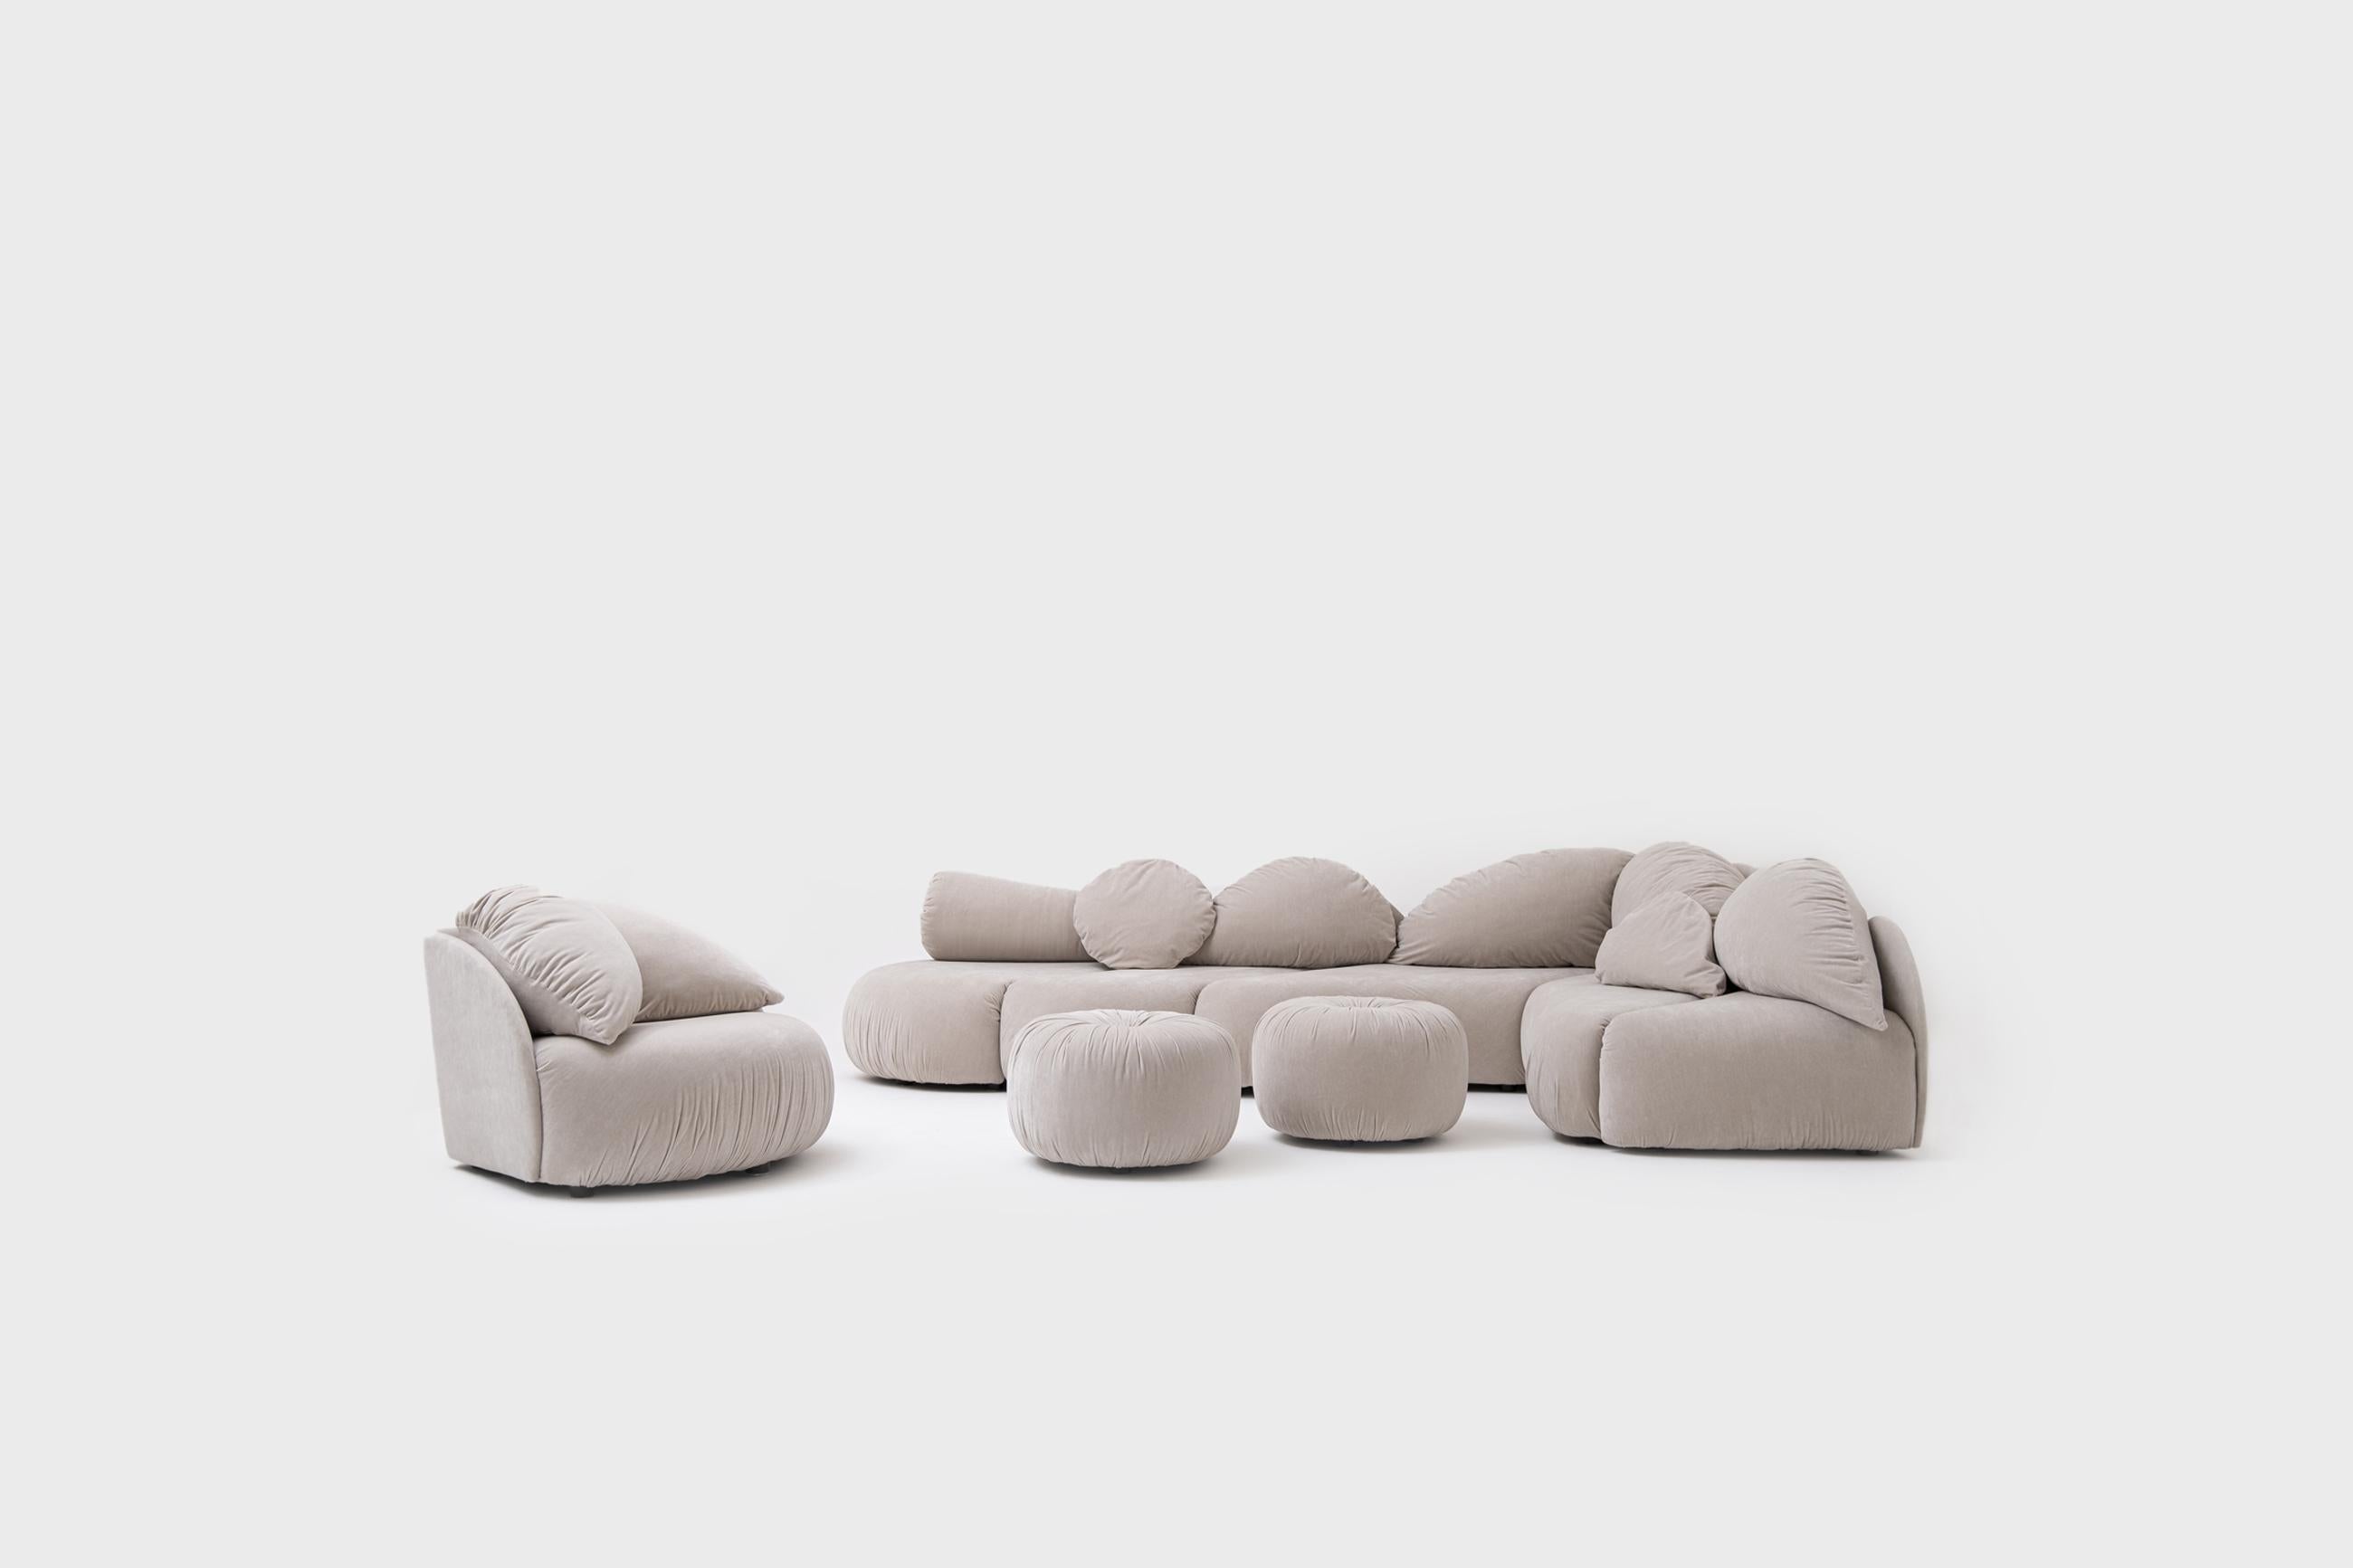 Stunning large sectional sofa group by Wiener Werstätten, 1970. Very distinctive design and extraordinary shapes. The sofa group consists 5 elements, 2 poufs and a loose chair, all newly upholstered in a High quality sand colored velvet. Unique